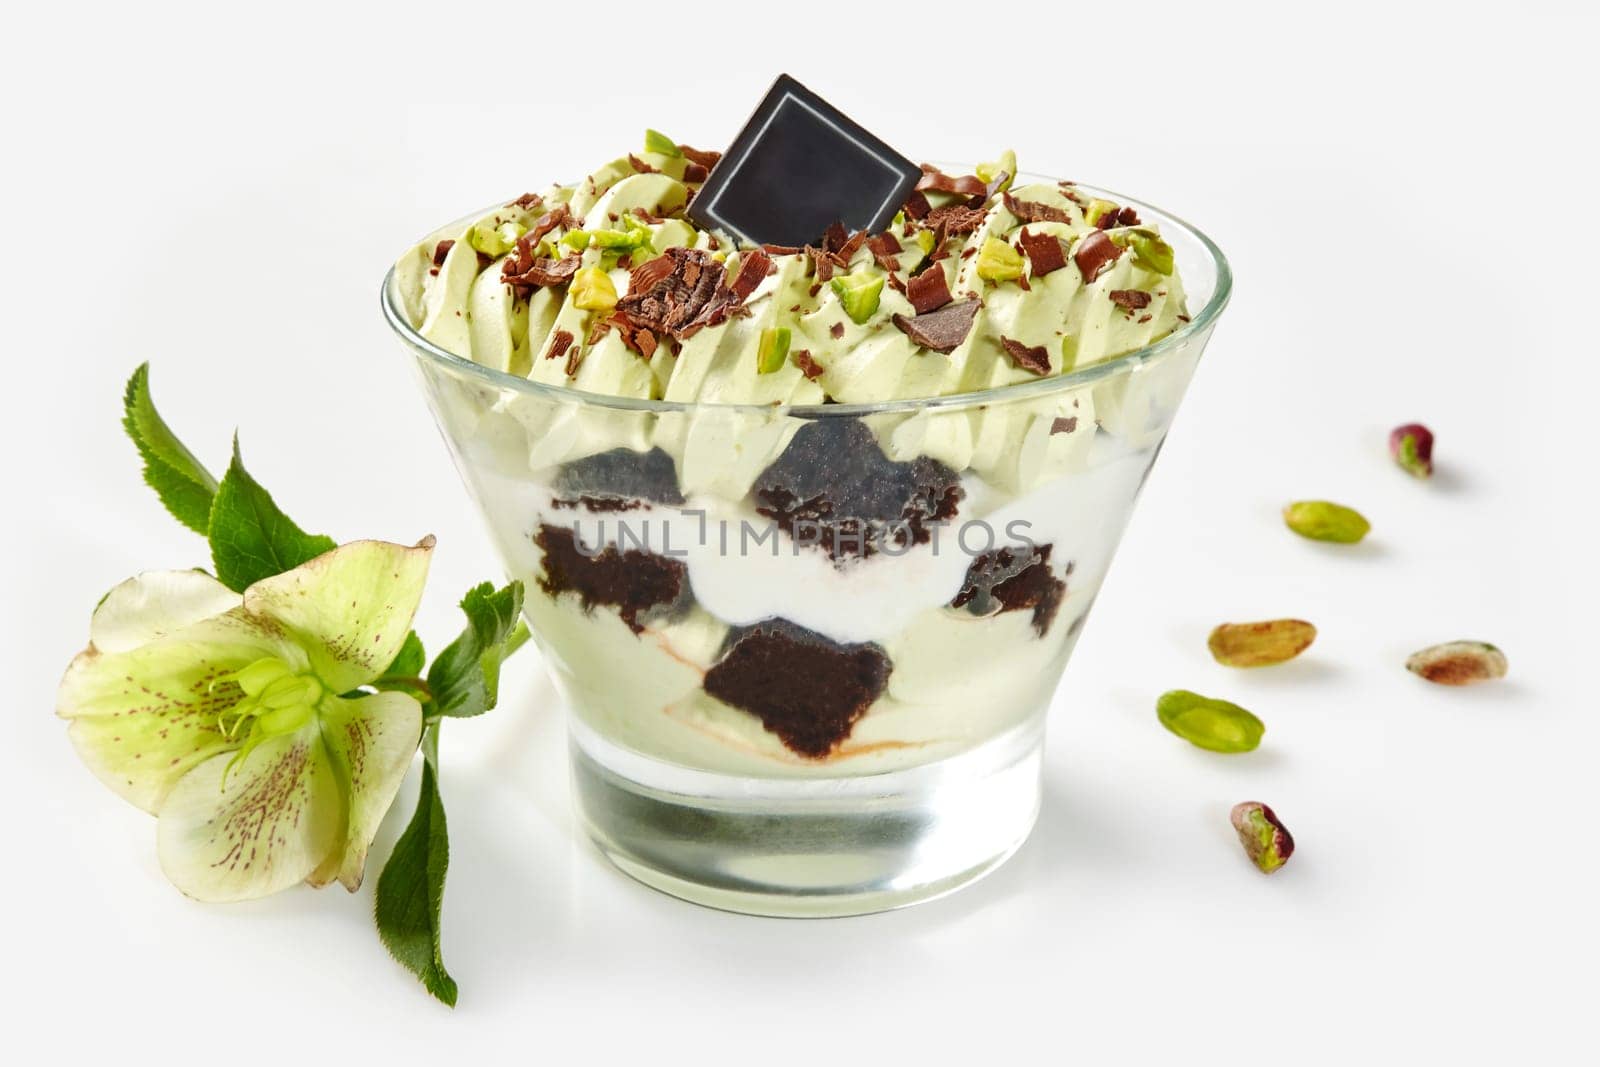 Exquisite pistachio-flavored layered dessert garnished with chocolate and pistachio nuts, accompanied by delicate greenish flower on white background